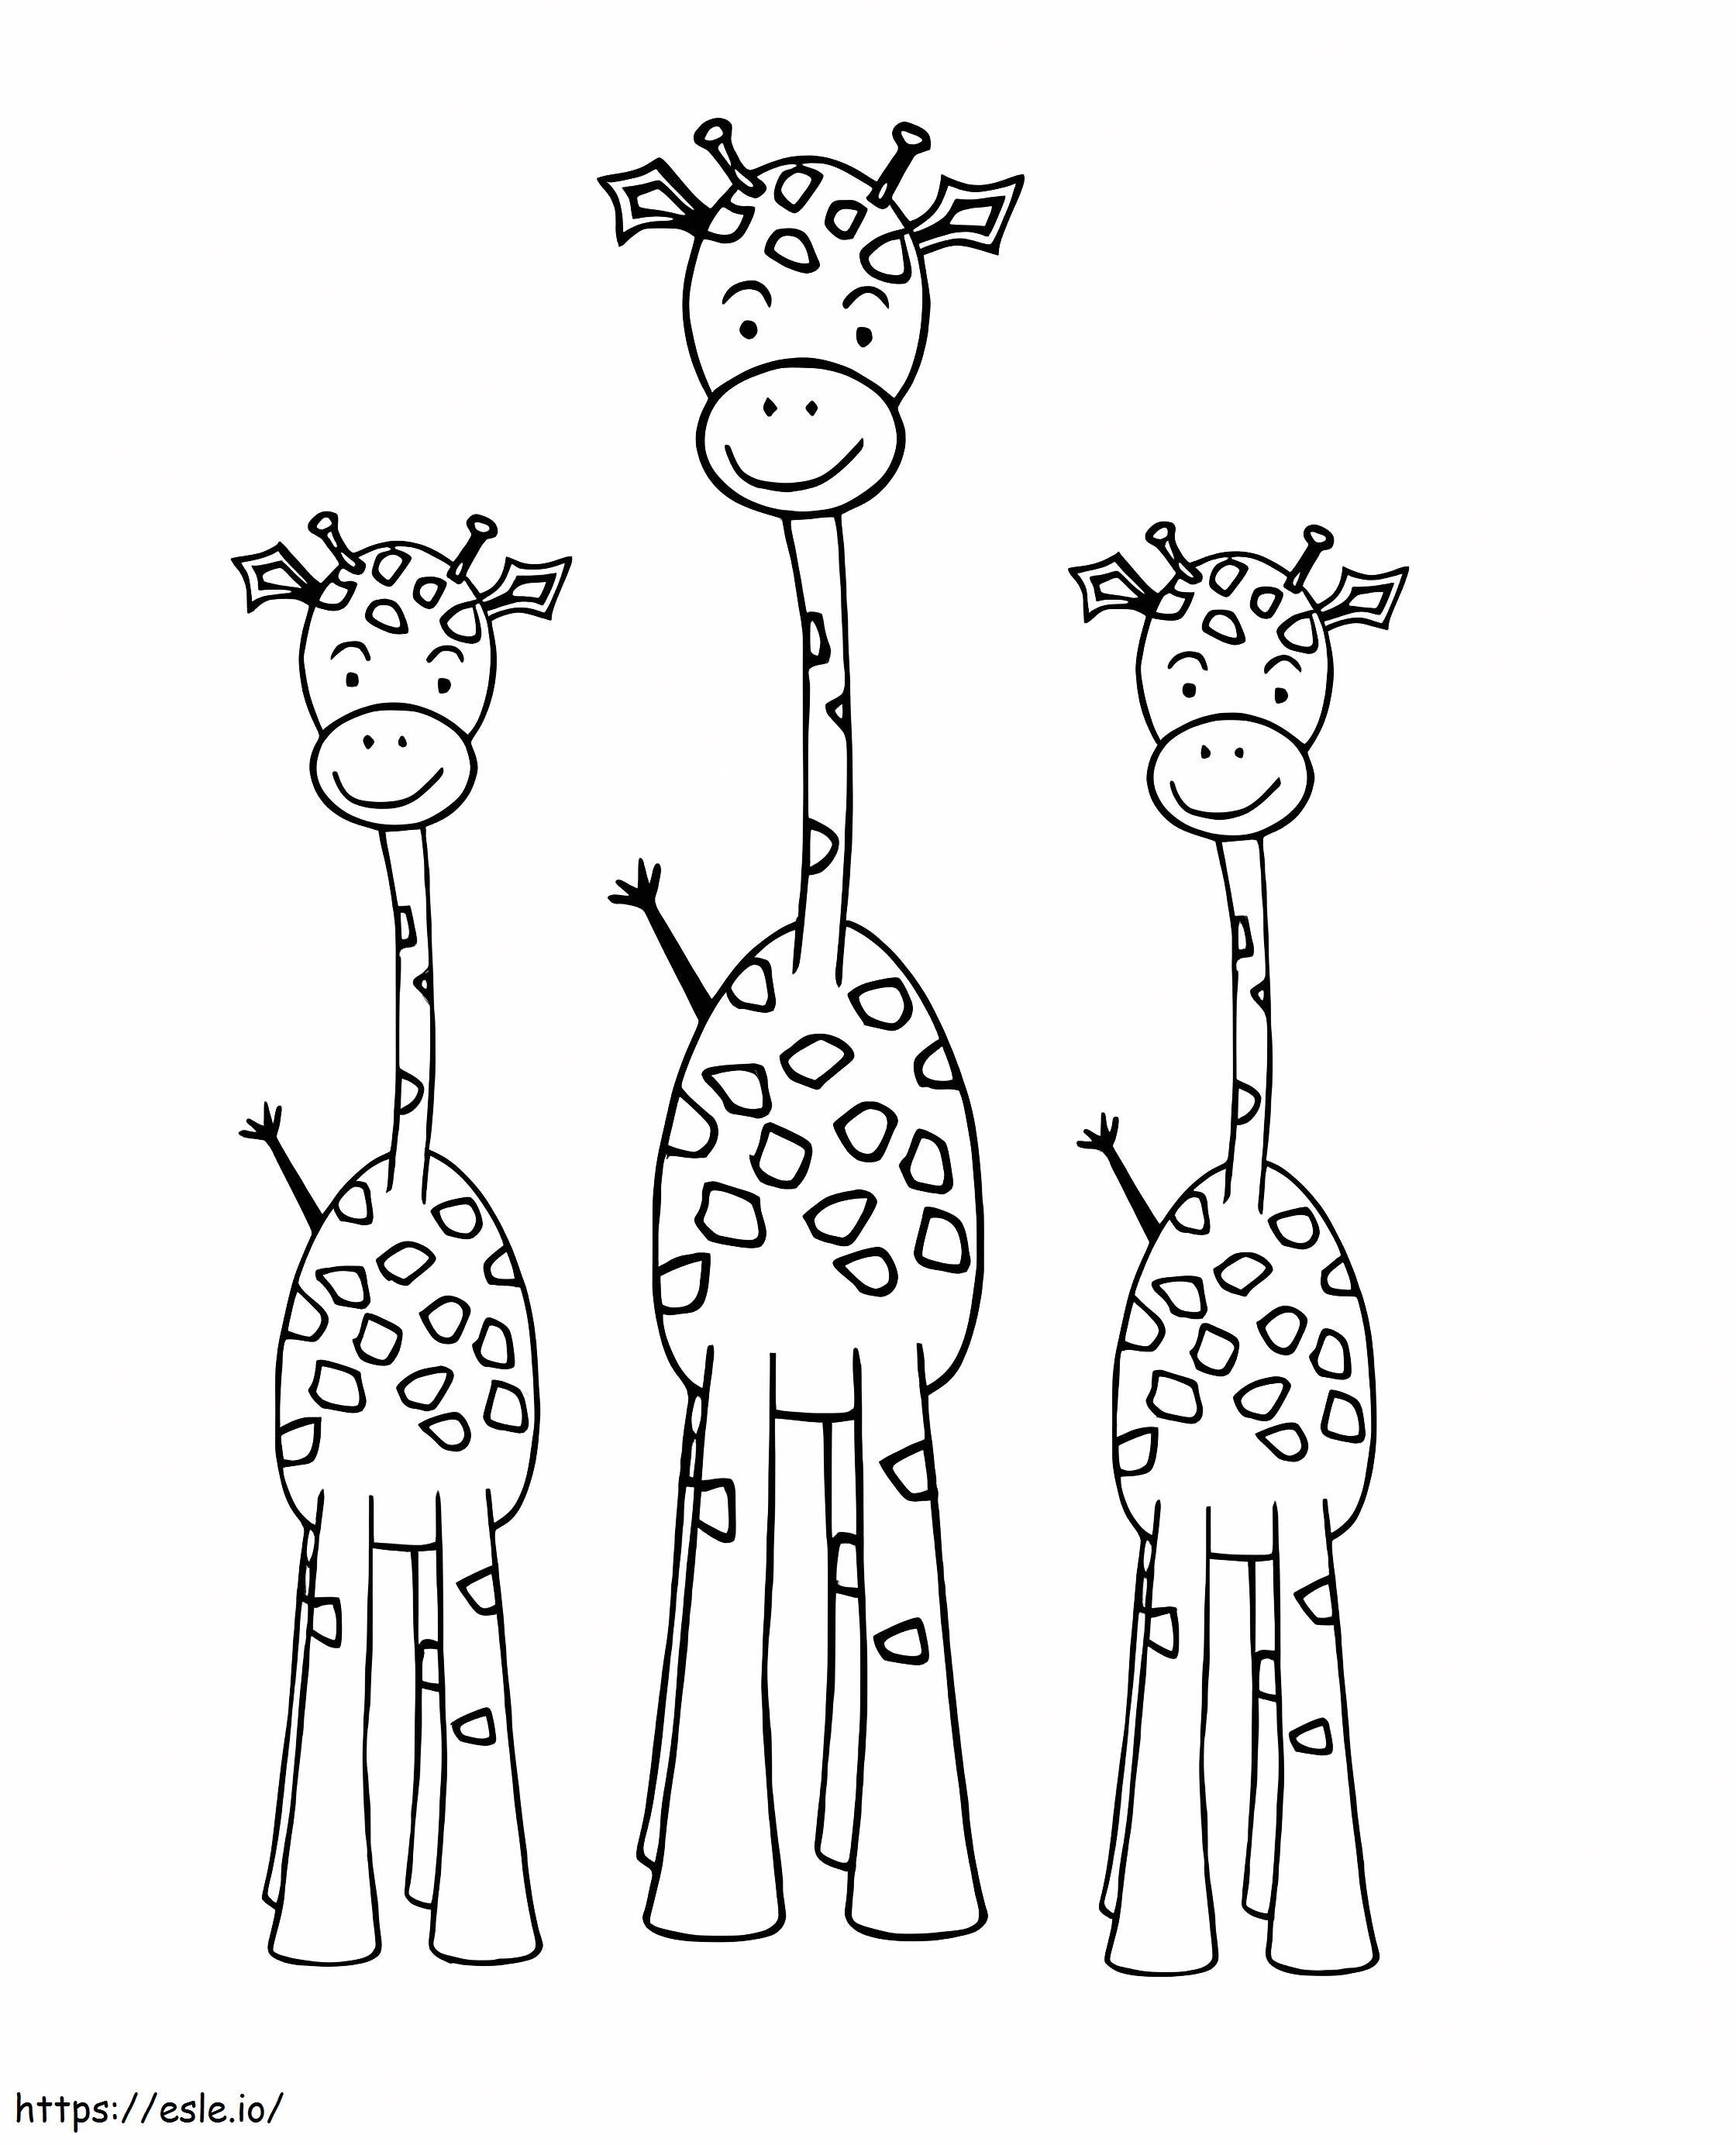 Three Giraffes coloring page